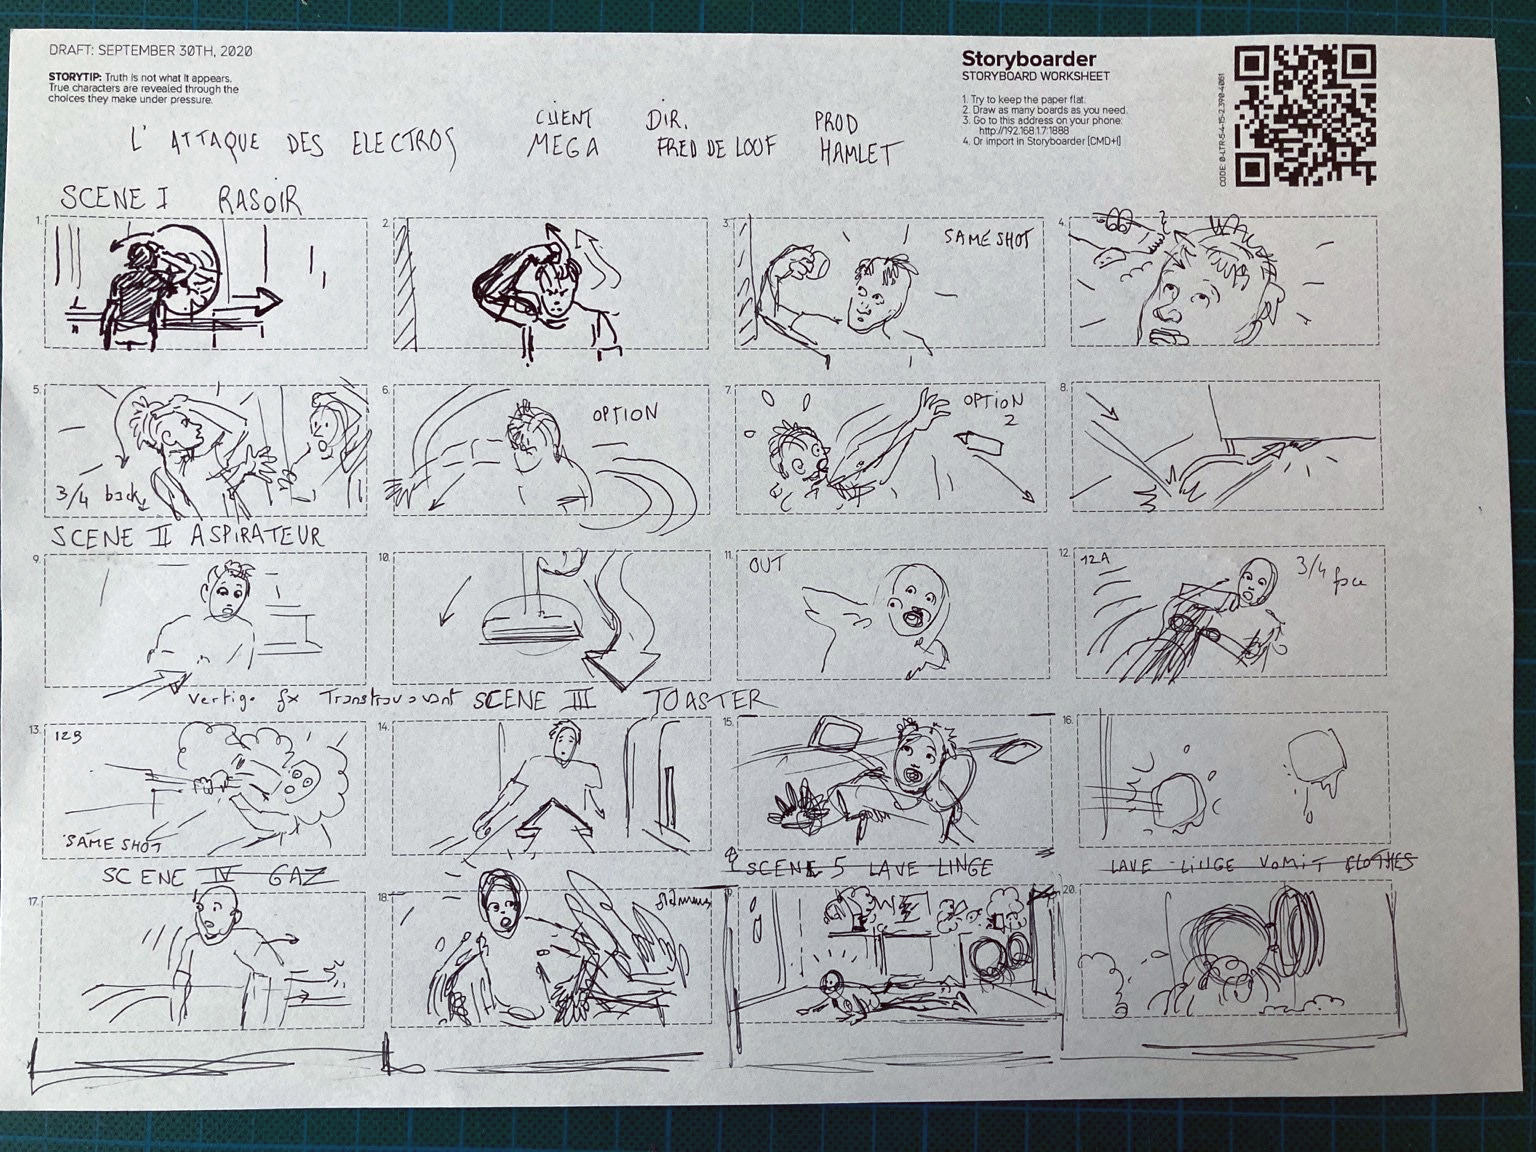 Storyboarder's QR code